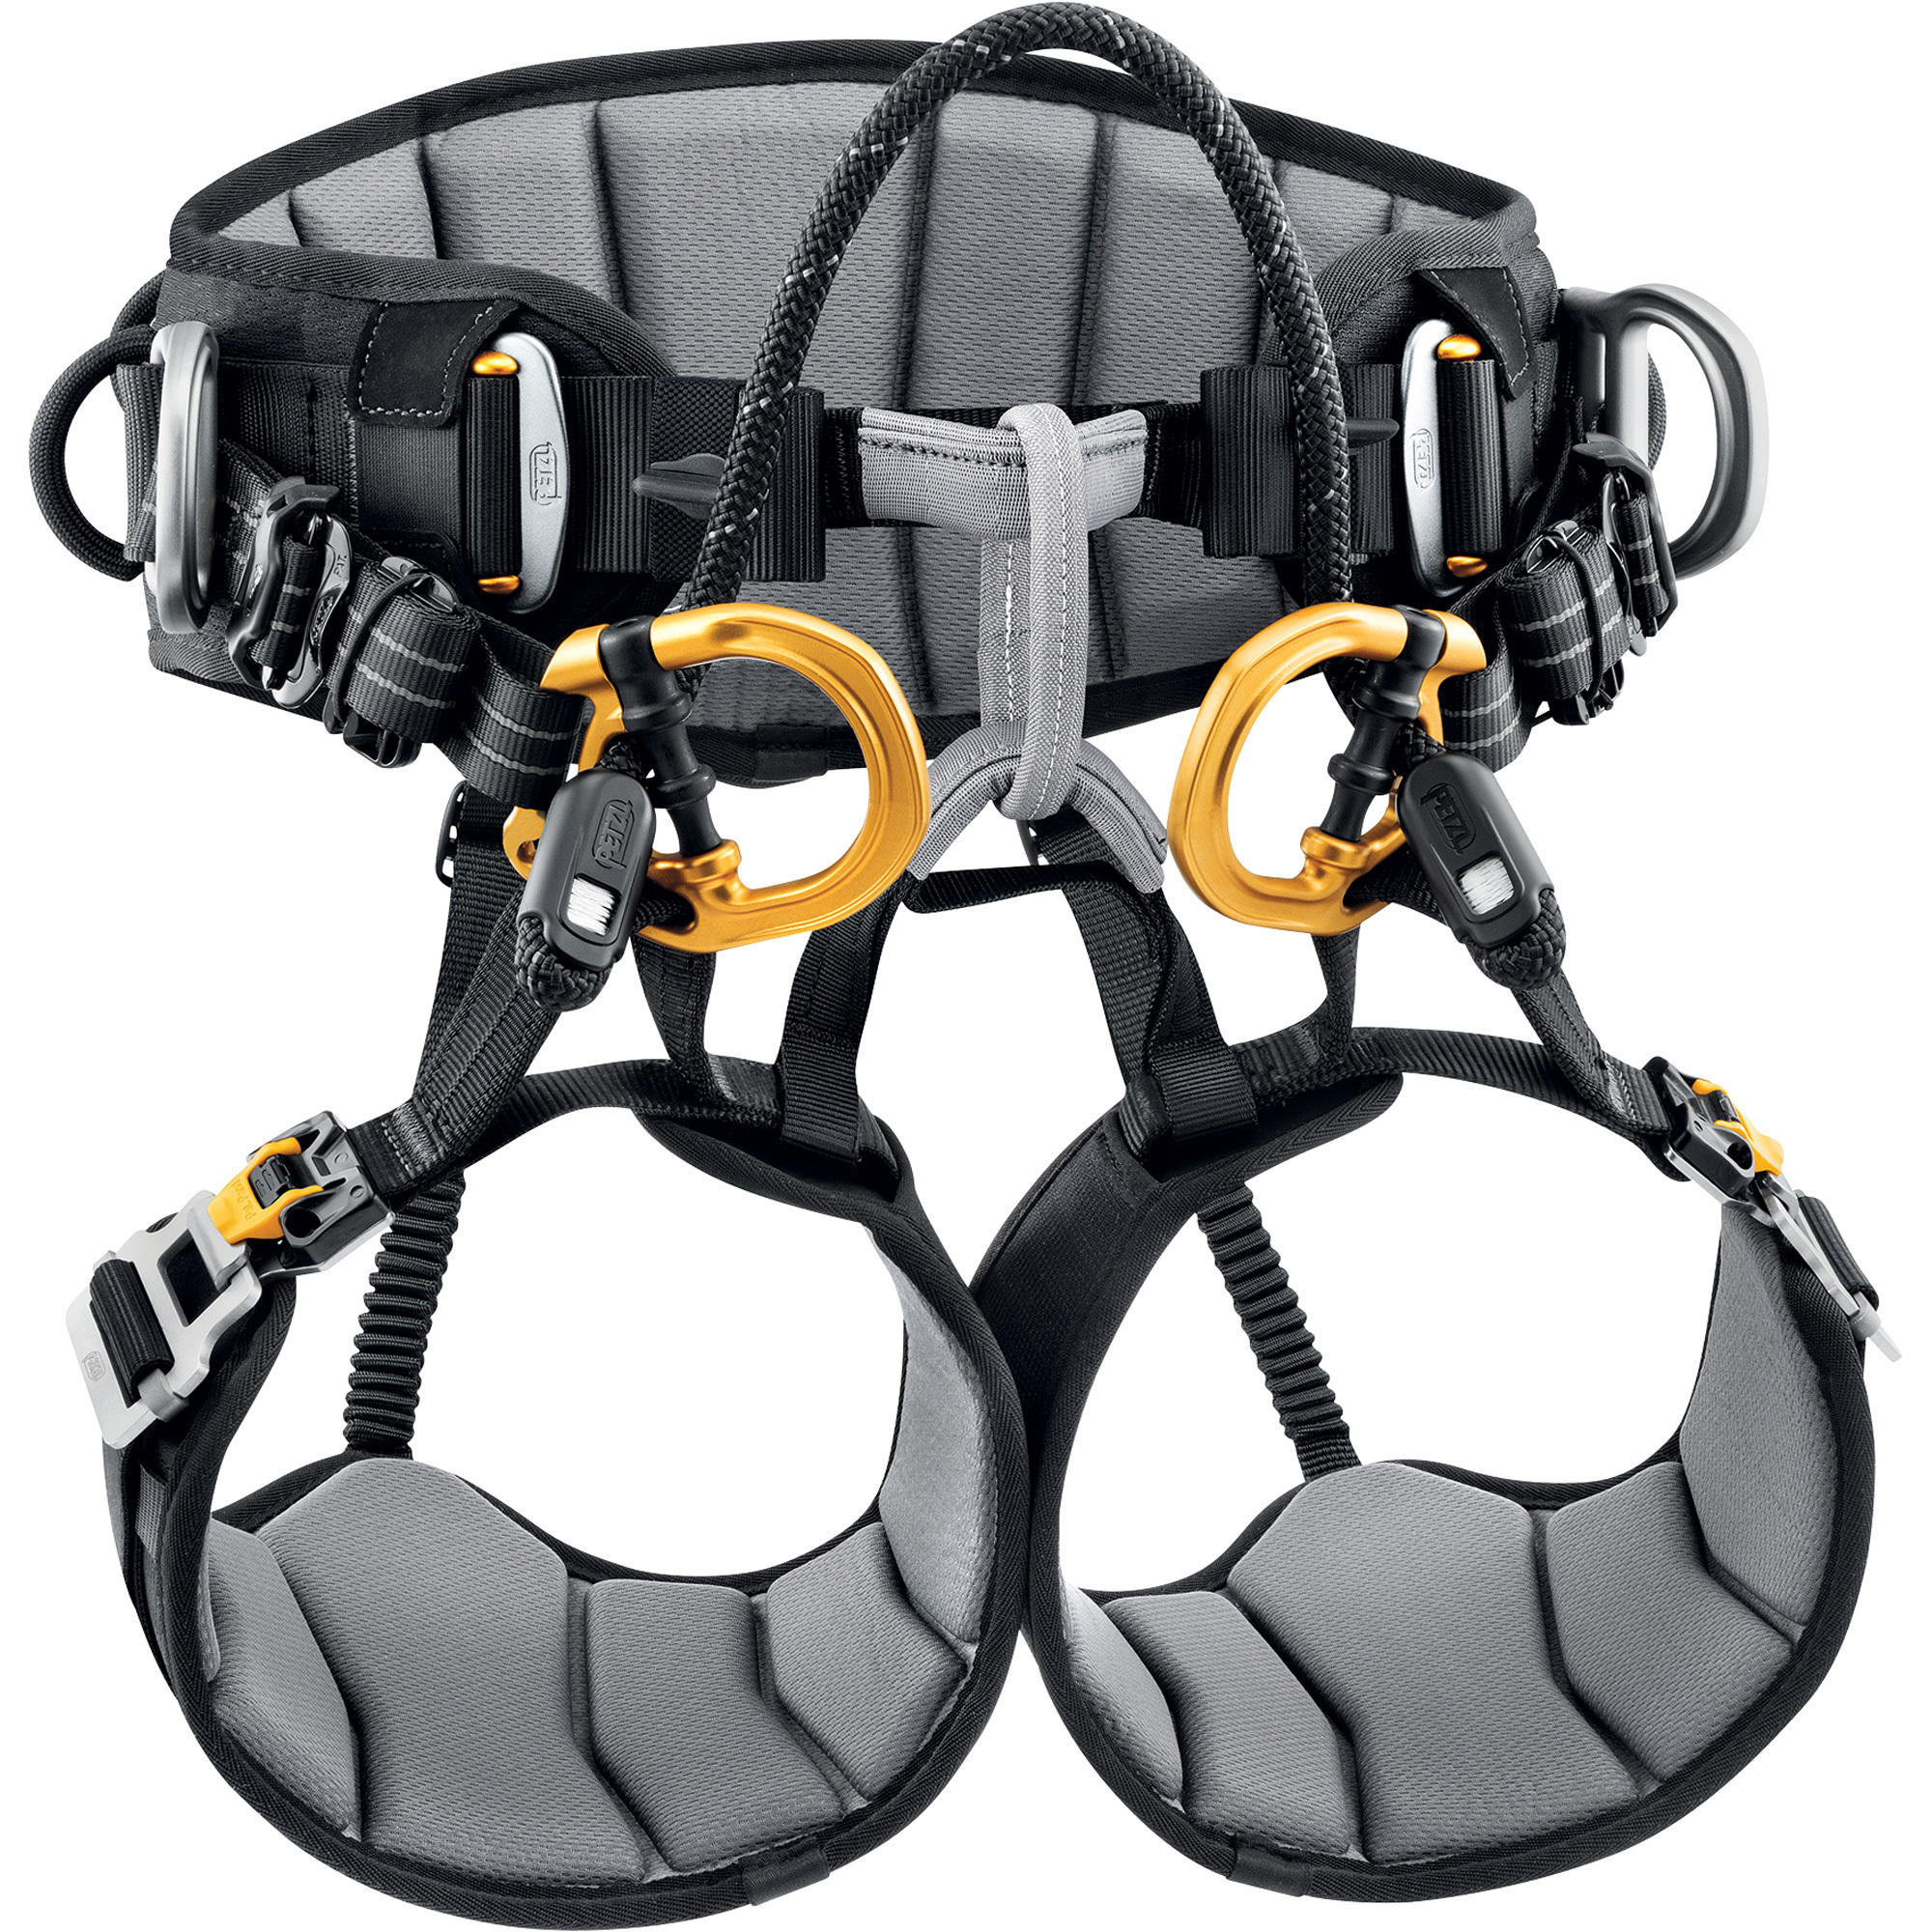 Petzl Sequoia SRT Tree Care Seat Harness for Ascents on Single Rope, Size 1, 308-Lb. Capacity, Model C069BA01